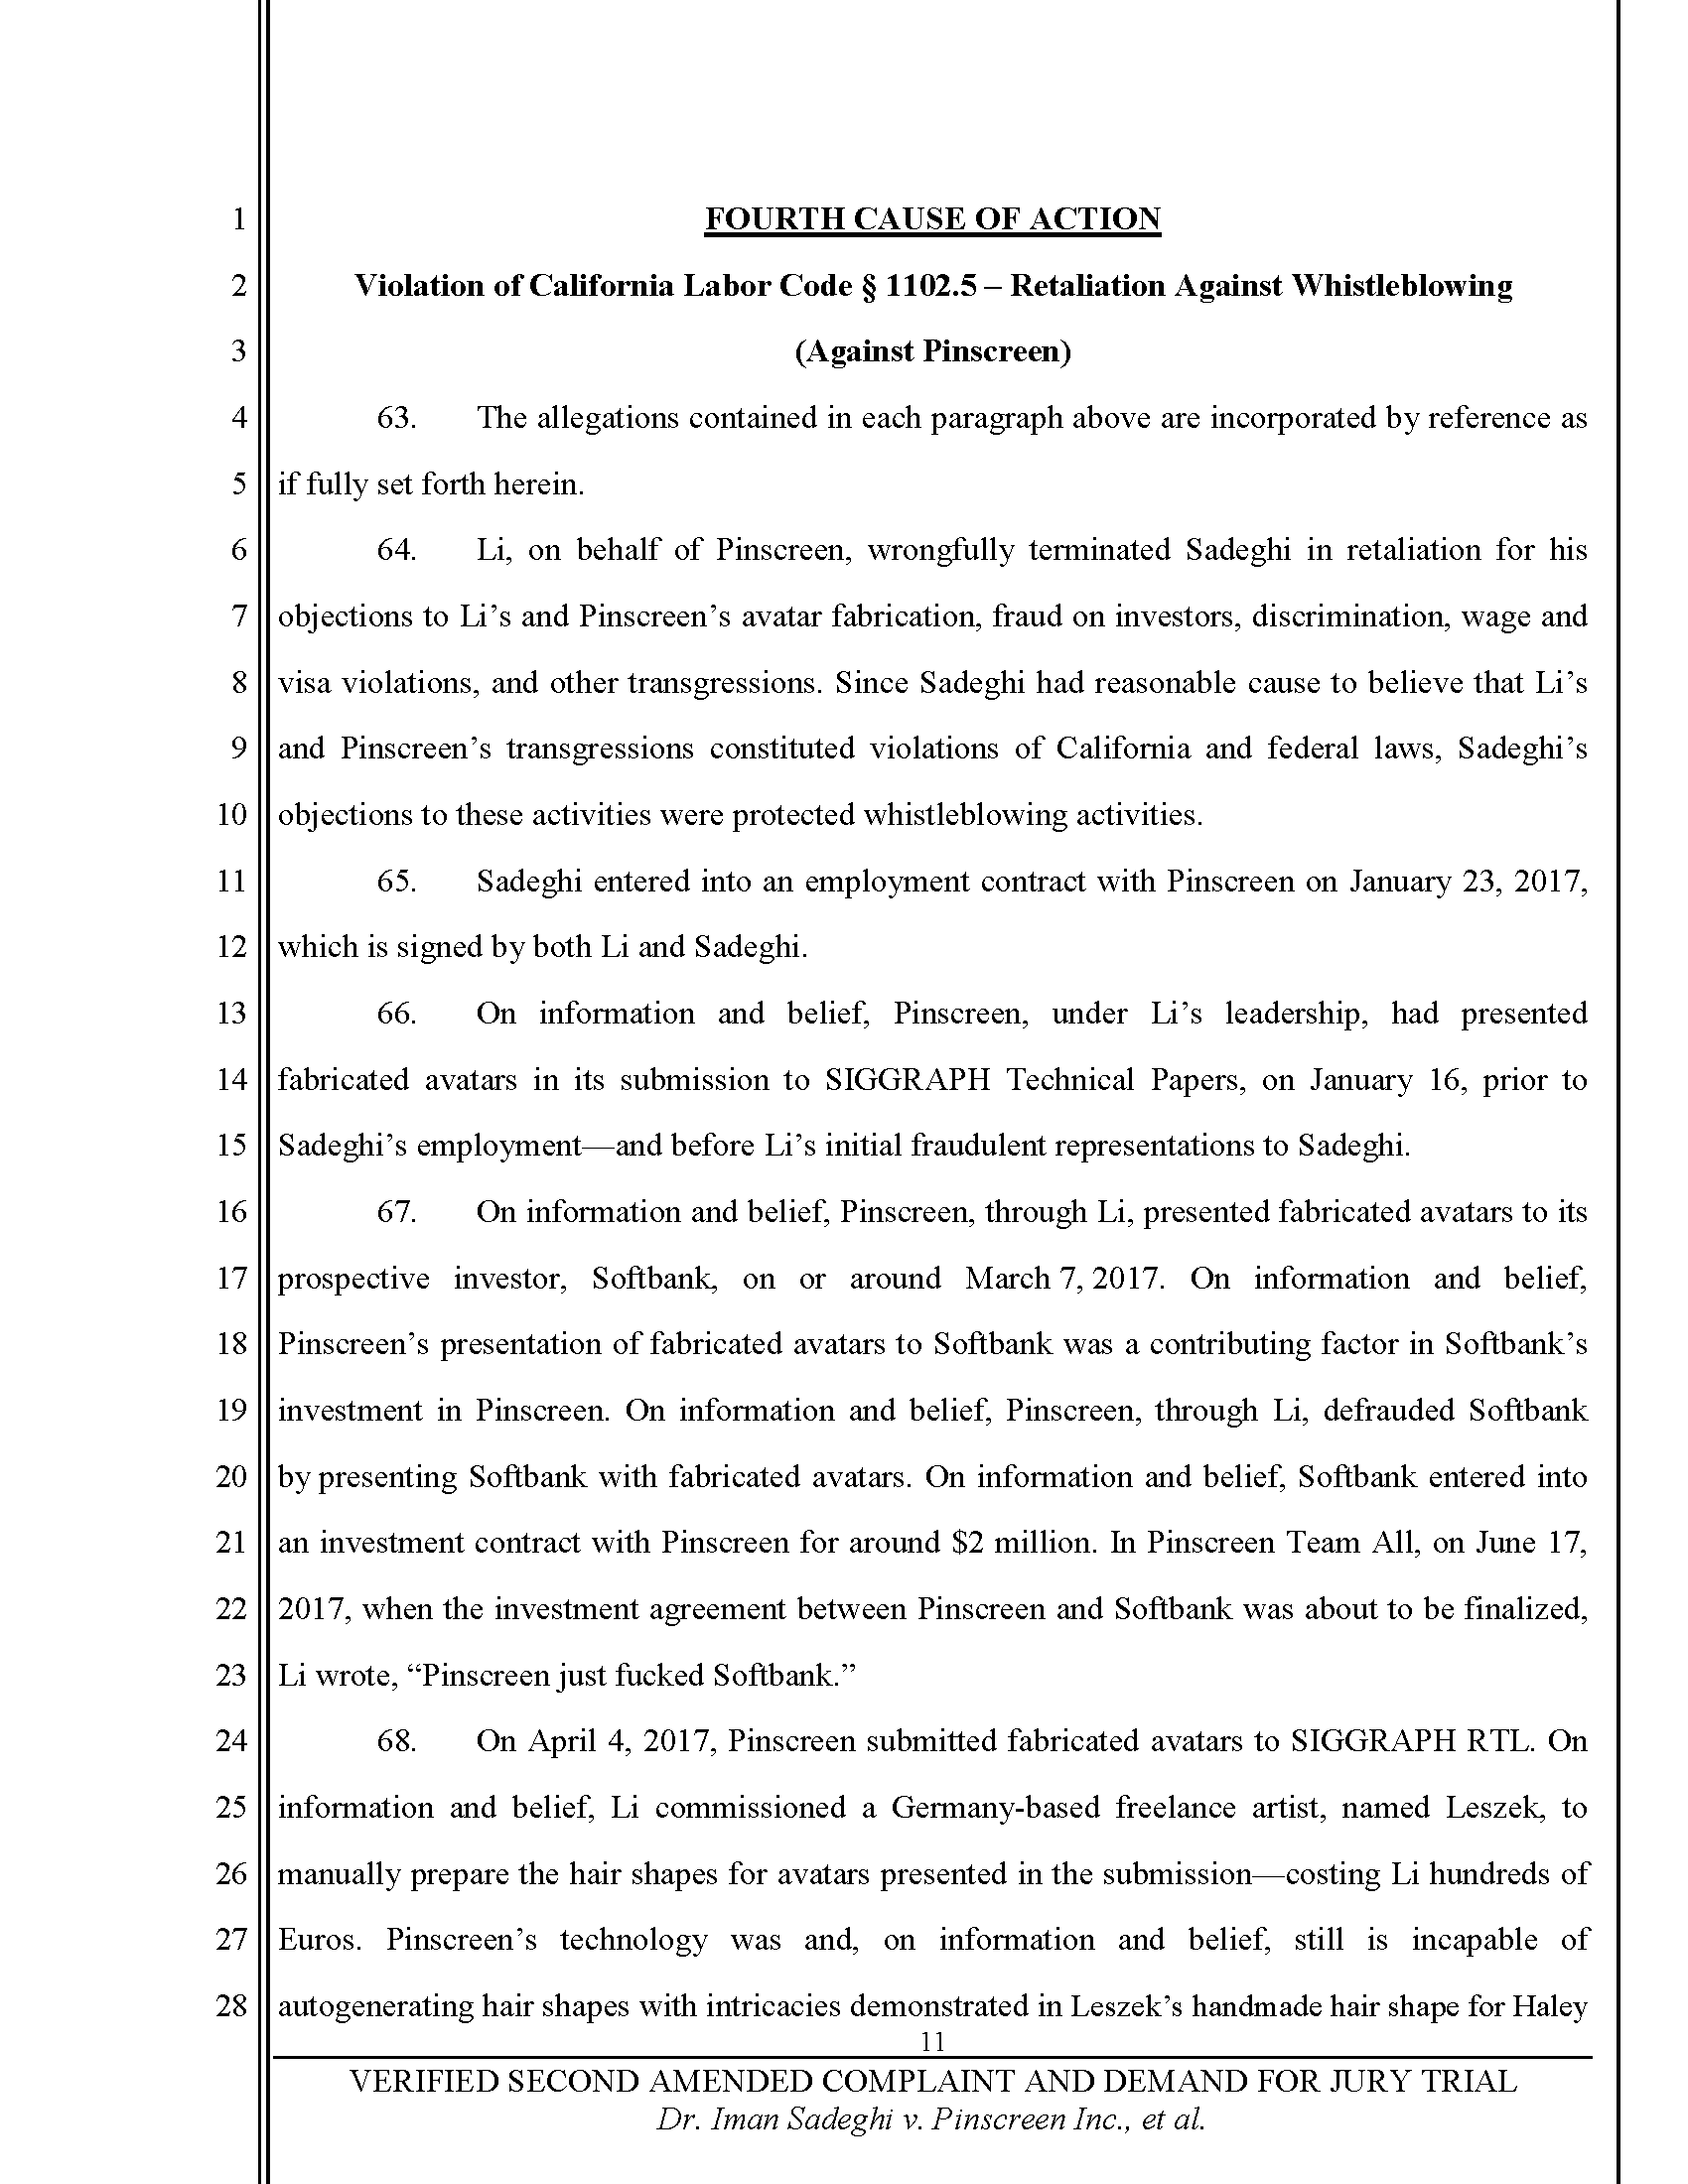 Second Amended Complaint (SAC) Page 12